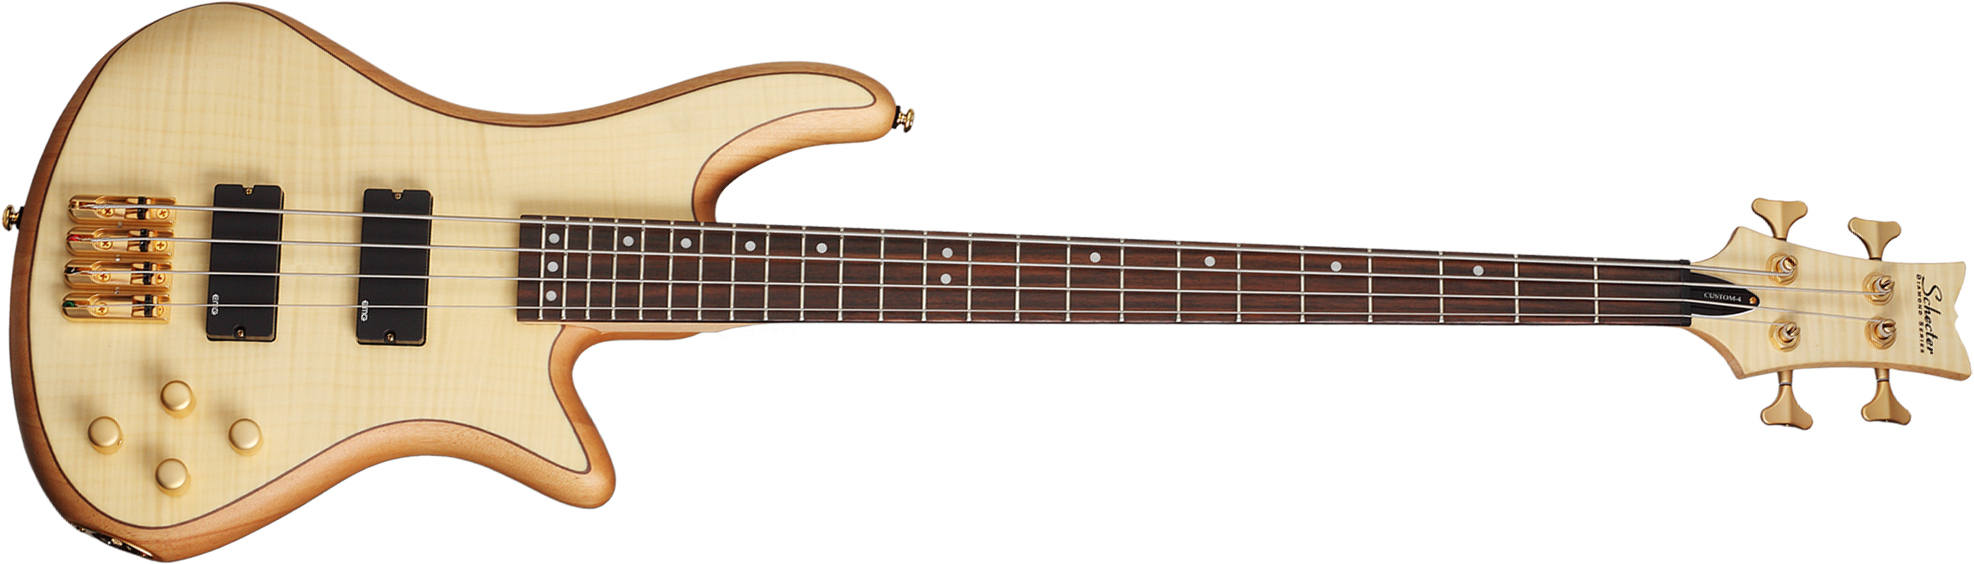 Schecter Stiletto Custom-4 Active Emg Rw - Natural Satin - Solid body electric bass - Main picture